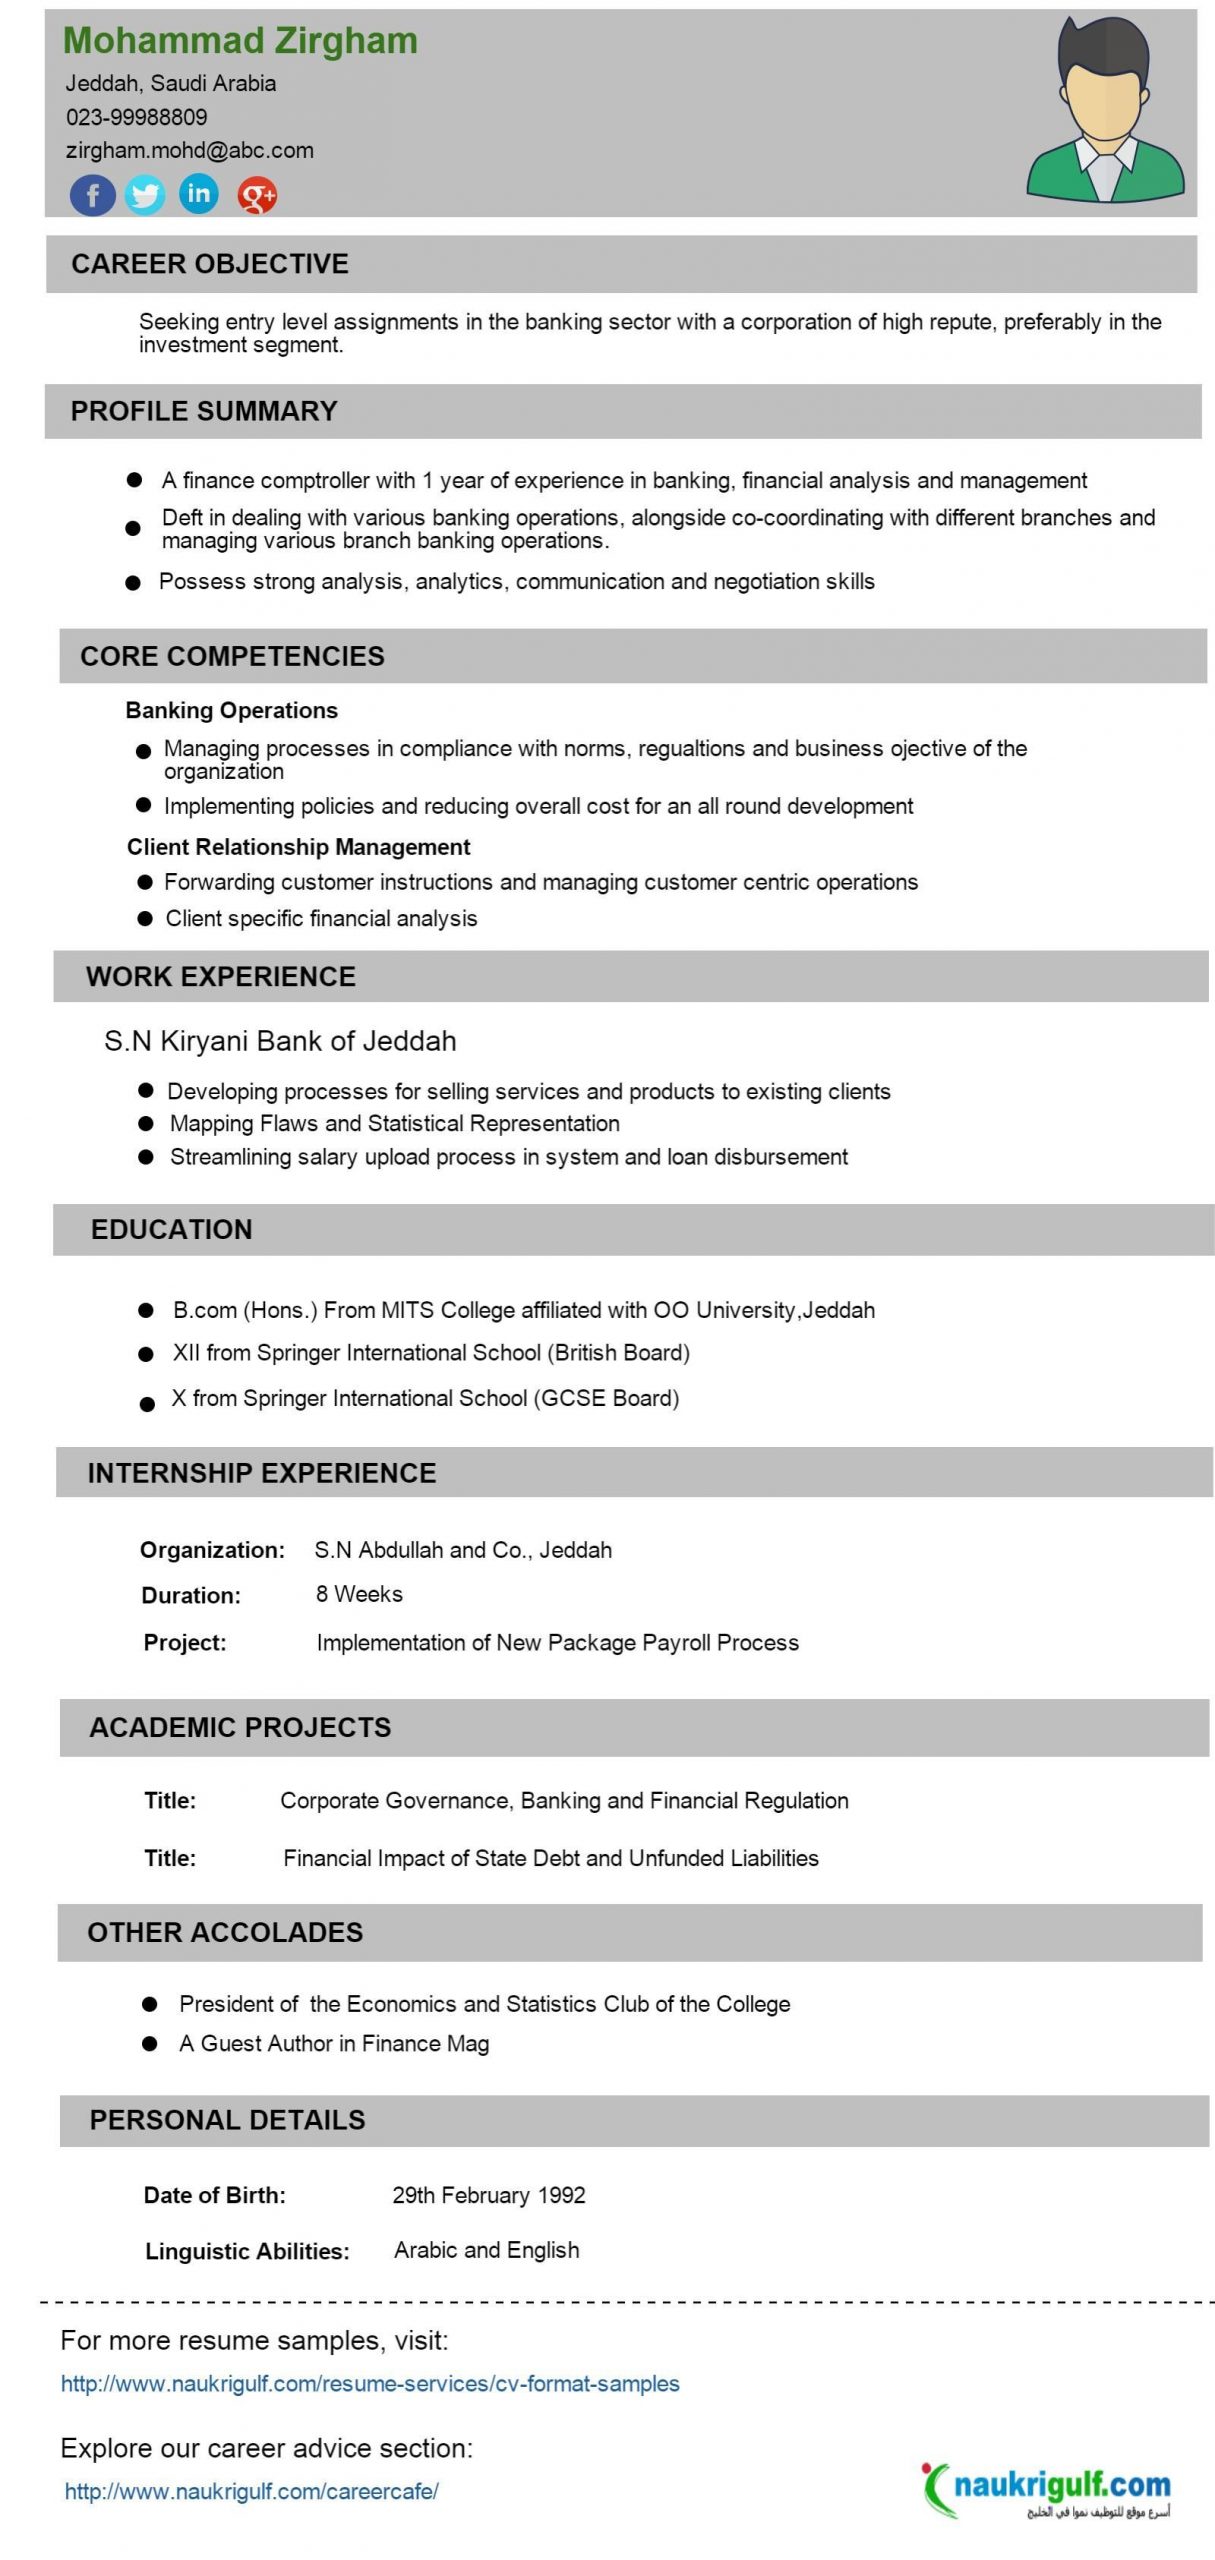 Sample Resume for Banking and Finance Graduate Banking & Finance Cv Template Job Resume format, Finance Jobs …